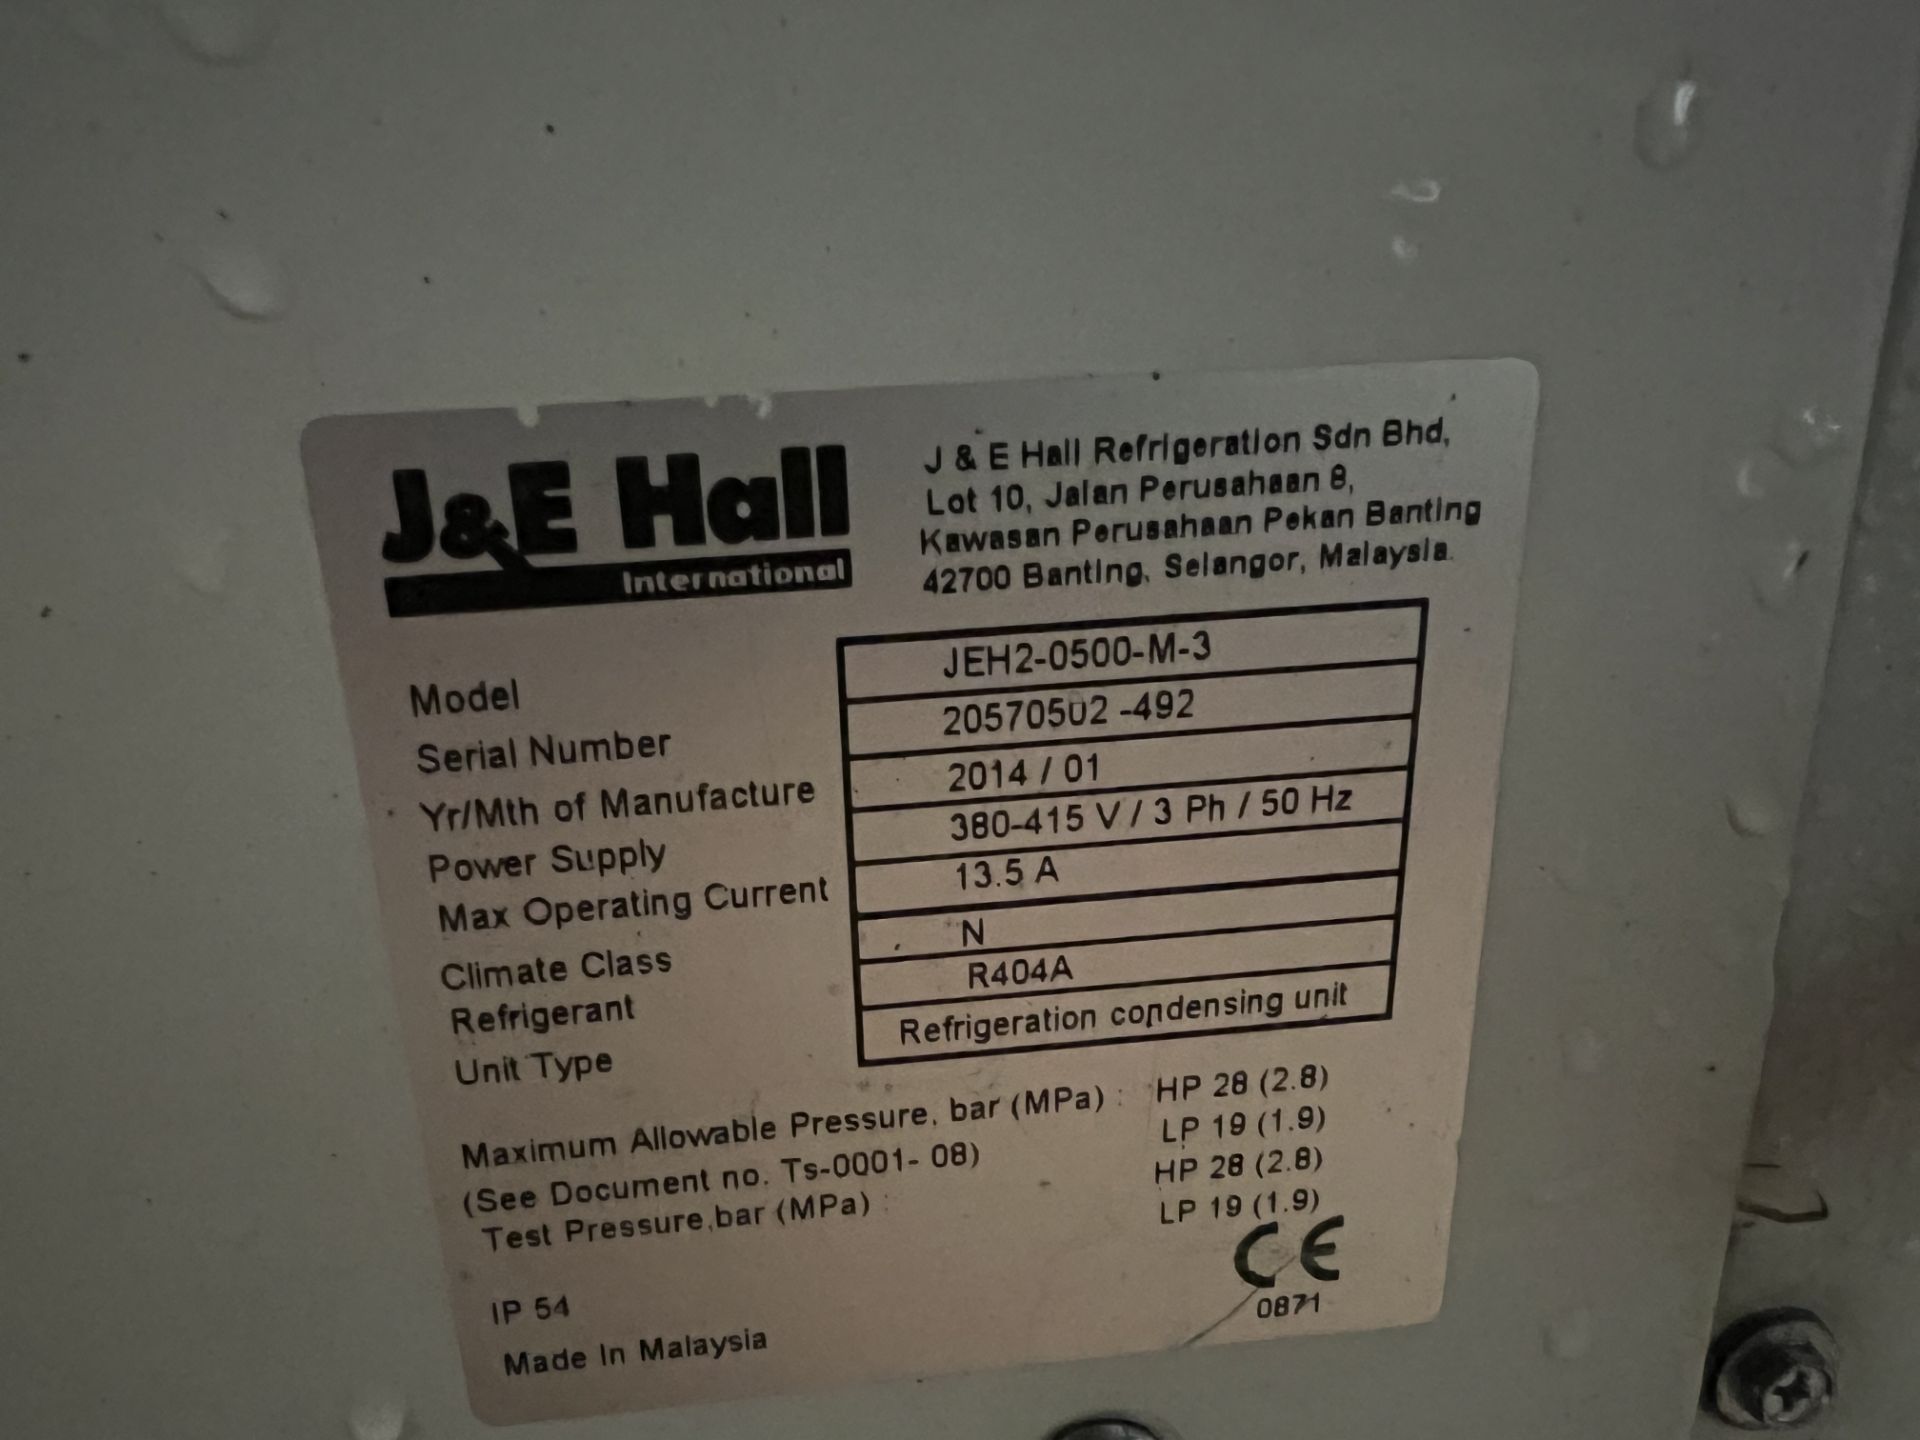 J&E Hall Fusion Compressor, approx. 1.3m x 0.5m x 1m high, lift out charge - £20 + VAT, lot - Image 2 of 3